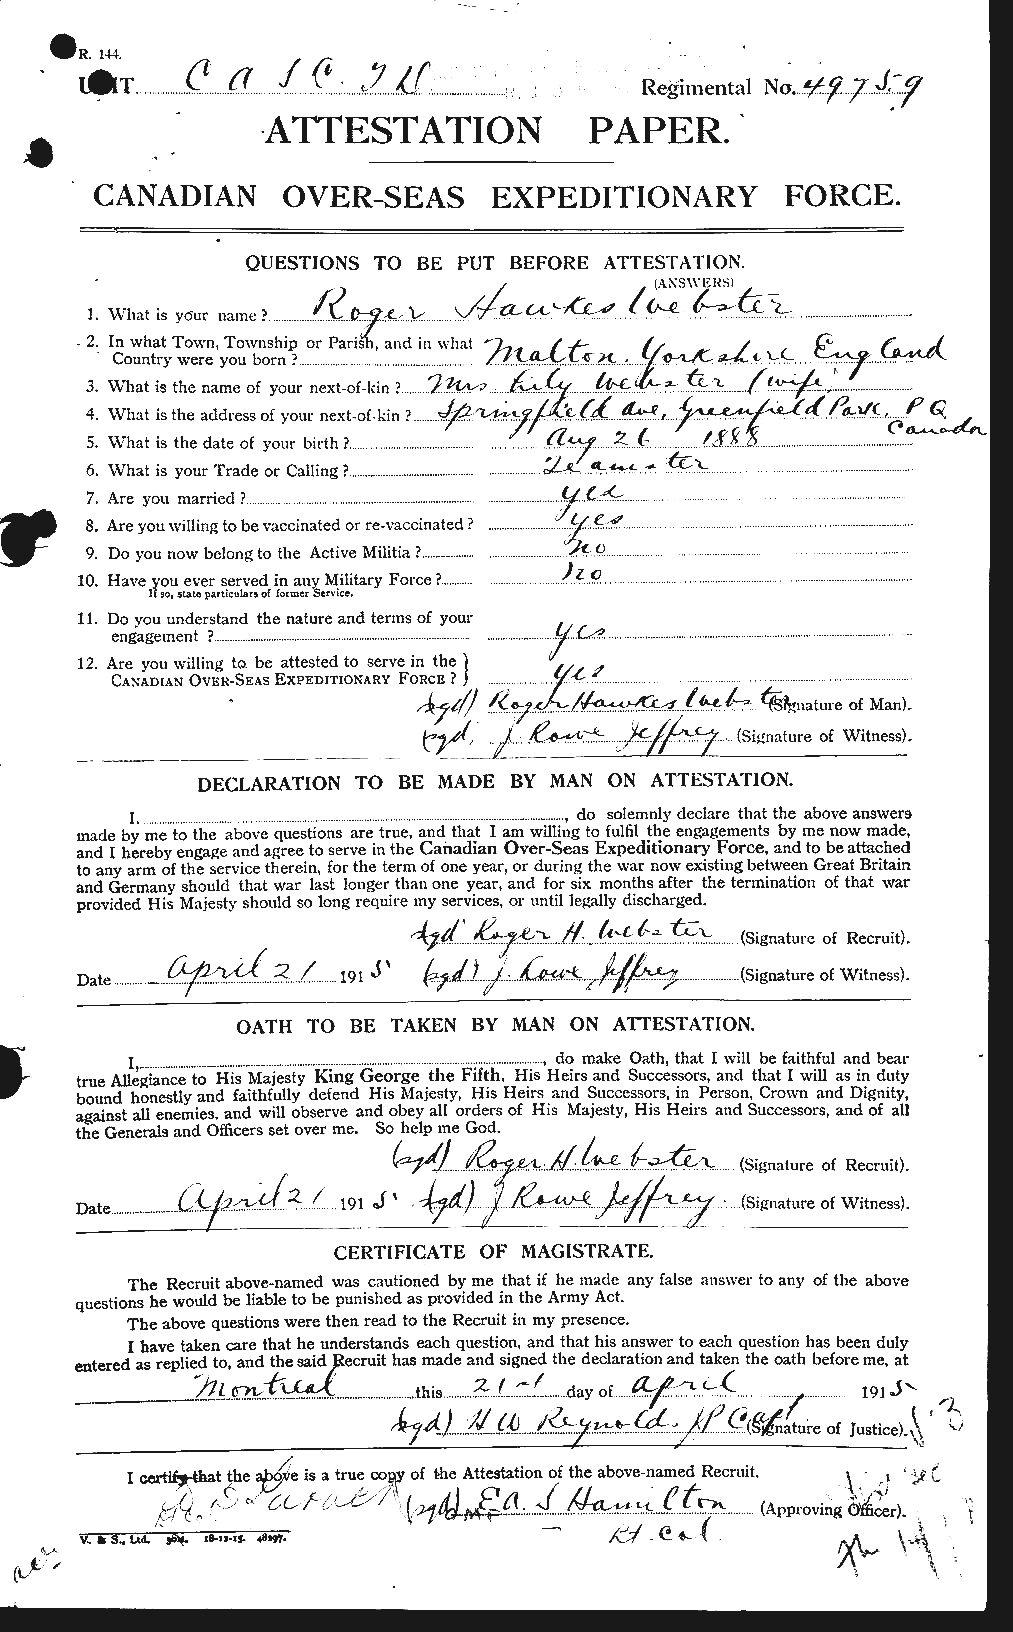 Personnel Records of the First World War - CEF 661970a